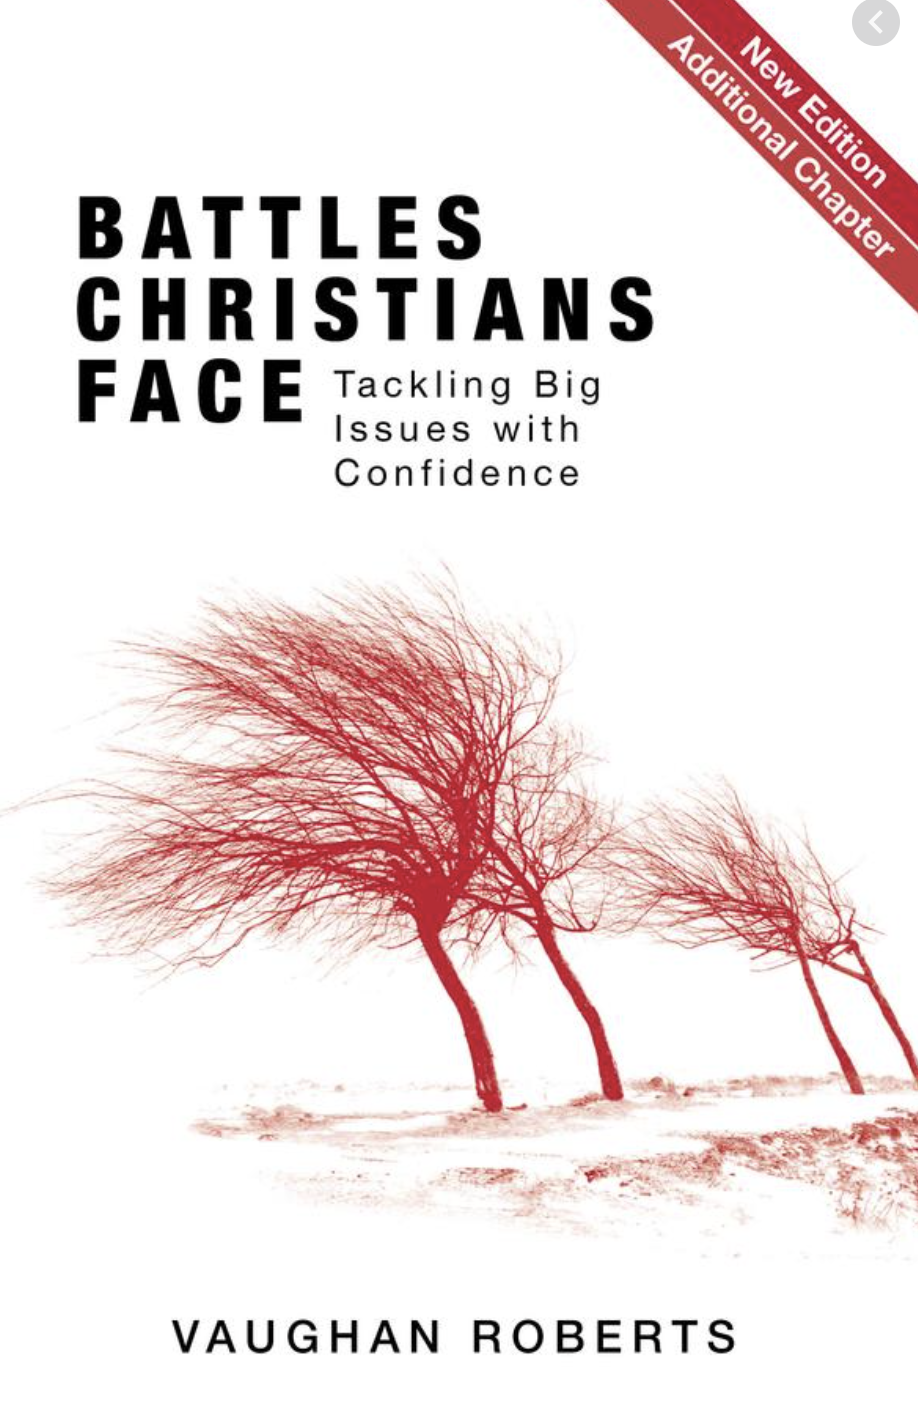 Front cover of Battles Christians Face: Tackling Big Issues with Confidence by Vaughan Roberts